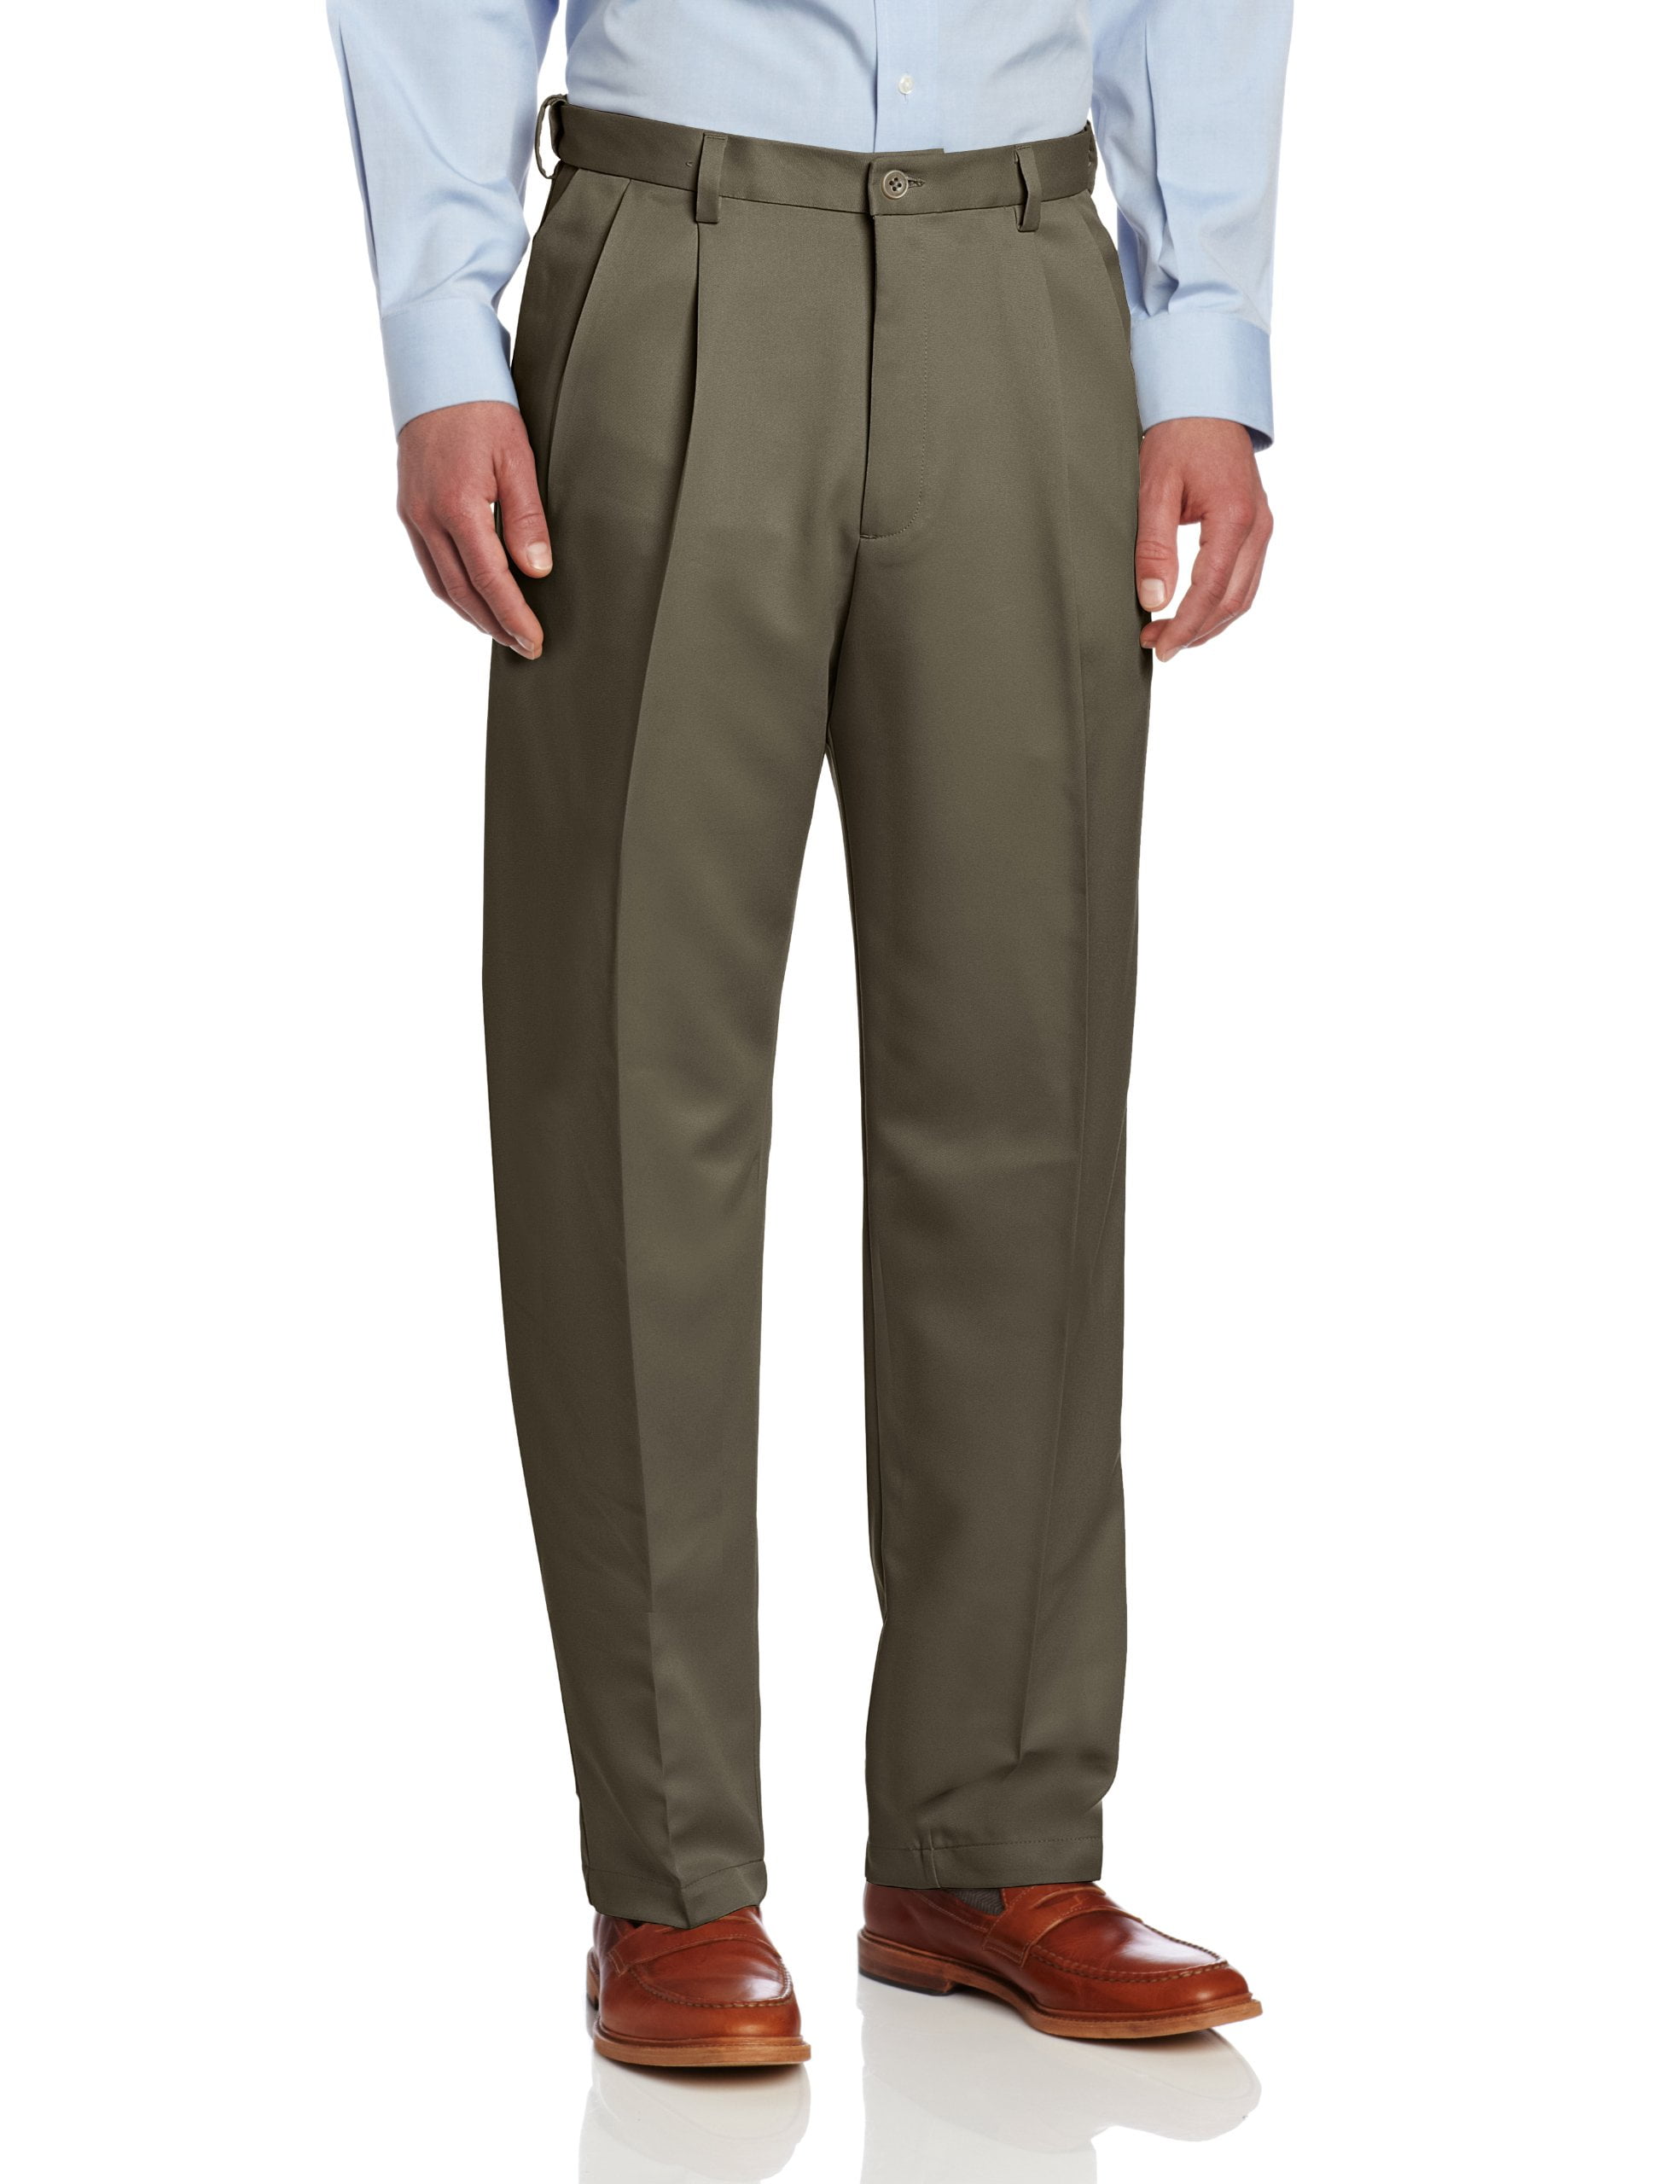 Haggar - Mens Dress Pants Taupe 34x30 Pleated Front Classic Fit 34 ...